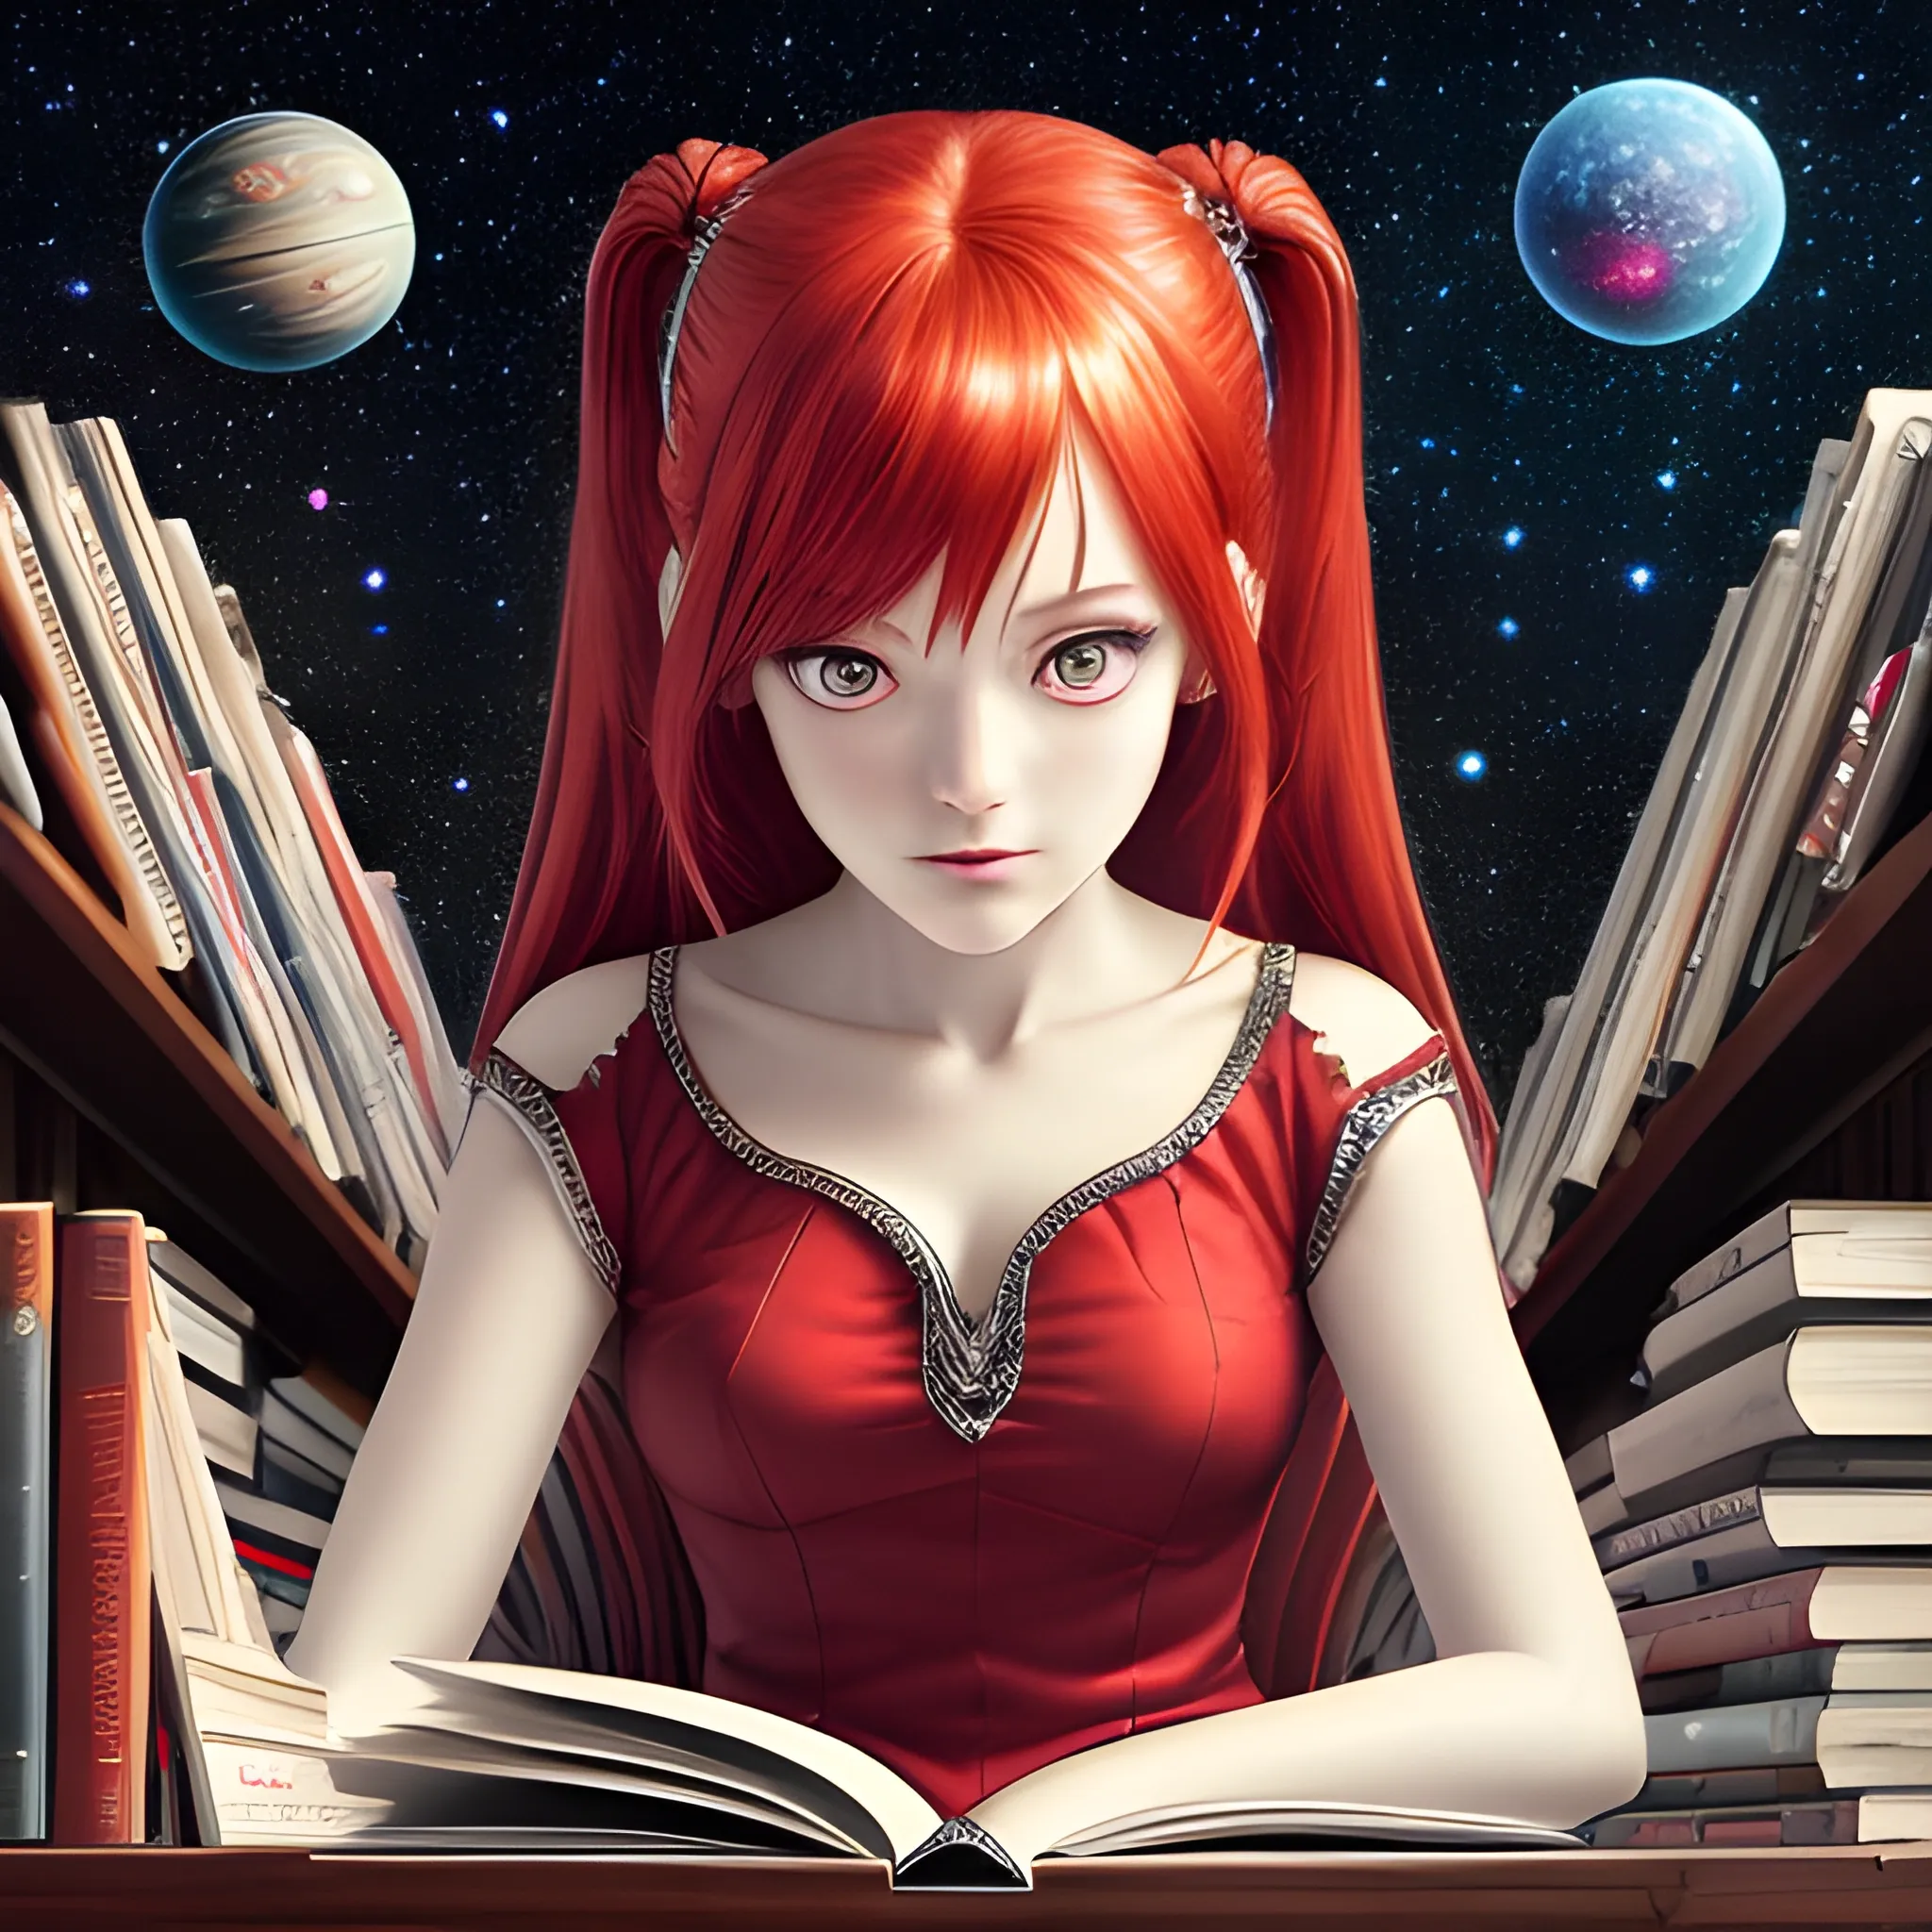 (((high detail))), best quality, (detailed), (high resolution) silver universe, books, books on a table, shelf with some books, studio ghiblin, anime, galaxy in the sky, woman  reading a book ,red hair, red dress, big black eyes 
 
, Trippy, 
, Cartoon